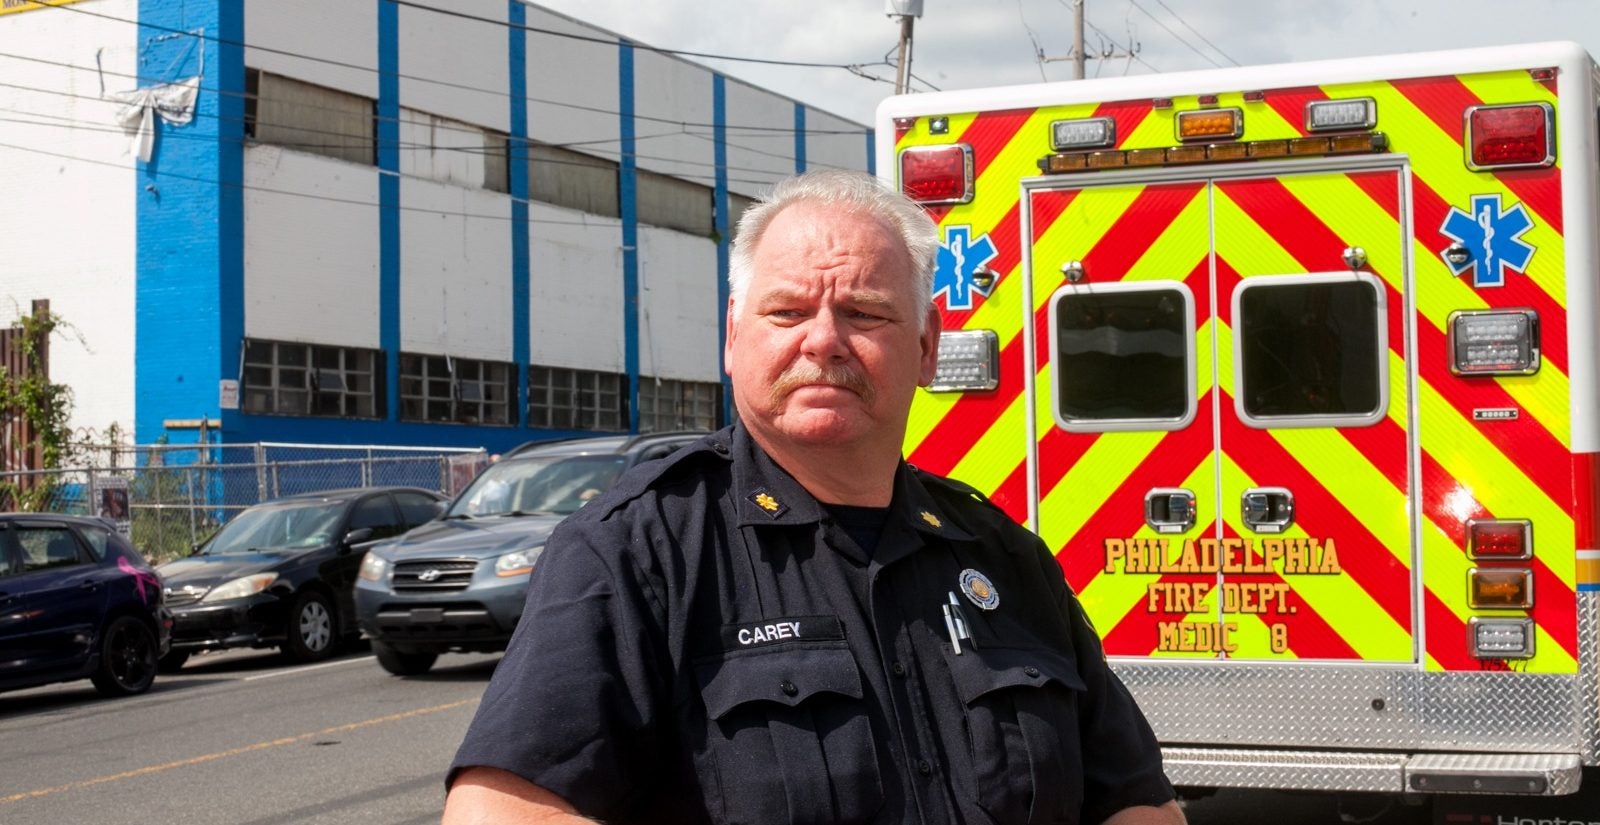 Kevin Carey, a fire paramedic chief with the Philadelphia Fire Department stands near an ambulance after responding to a call for a cardiac arrest in the Kensington section of Philadelphia. (Brad Larrison for WHYY)